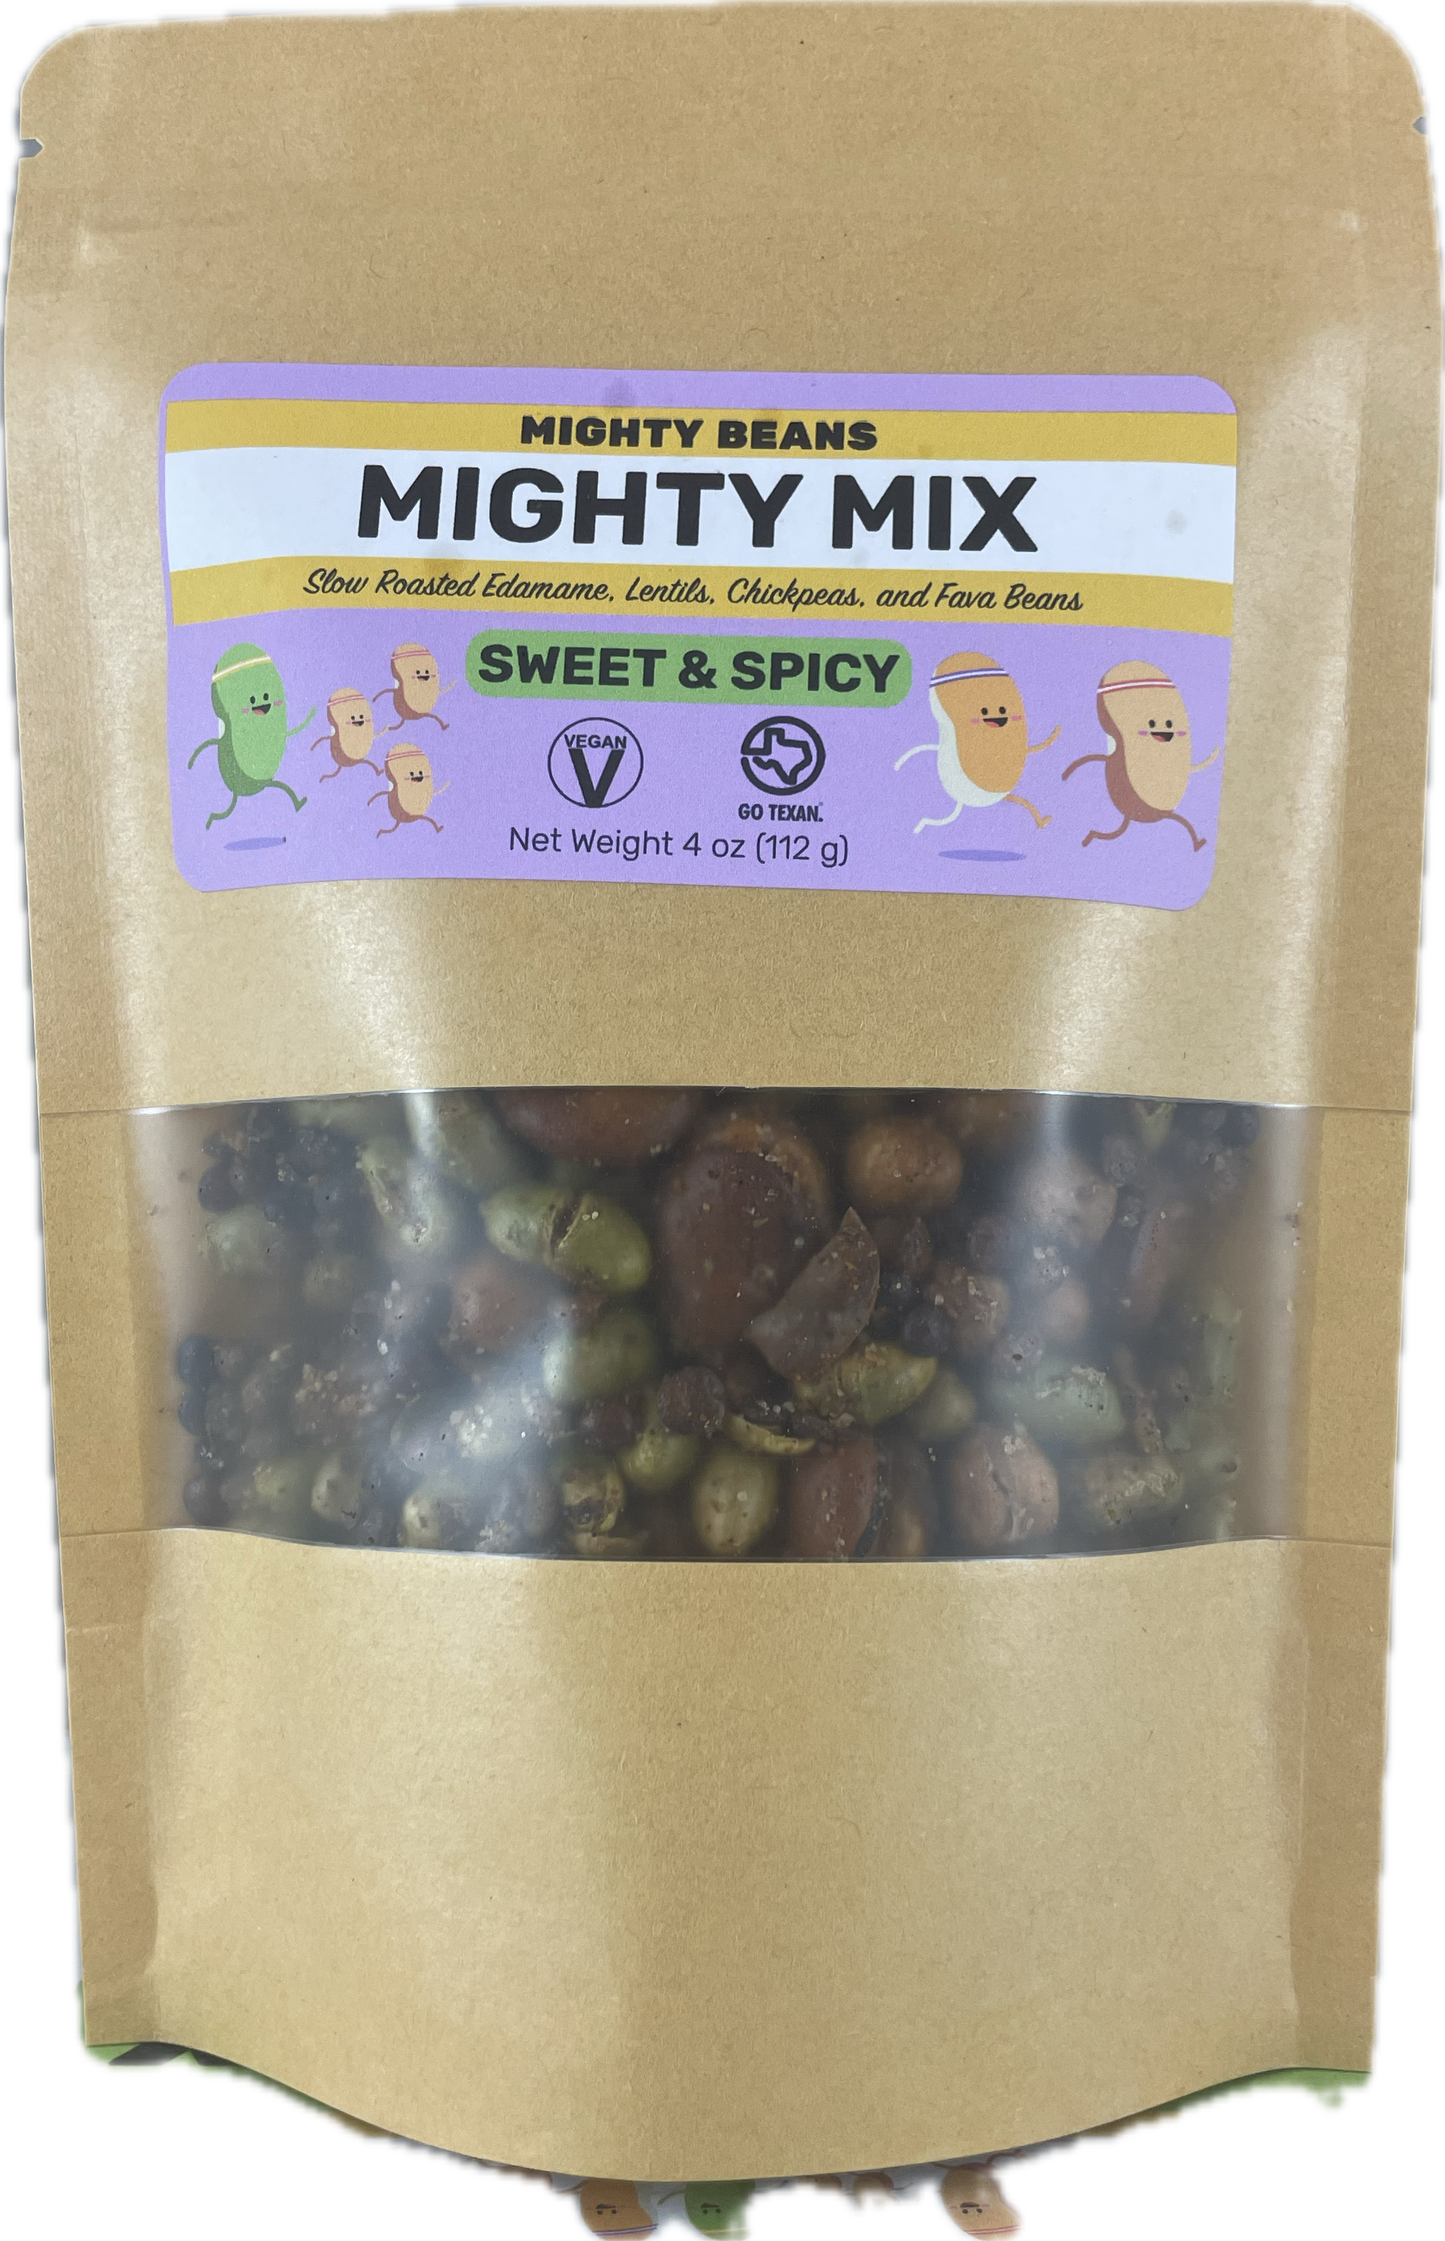 Sweet & Spicy Mighty Mix